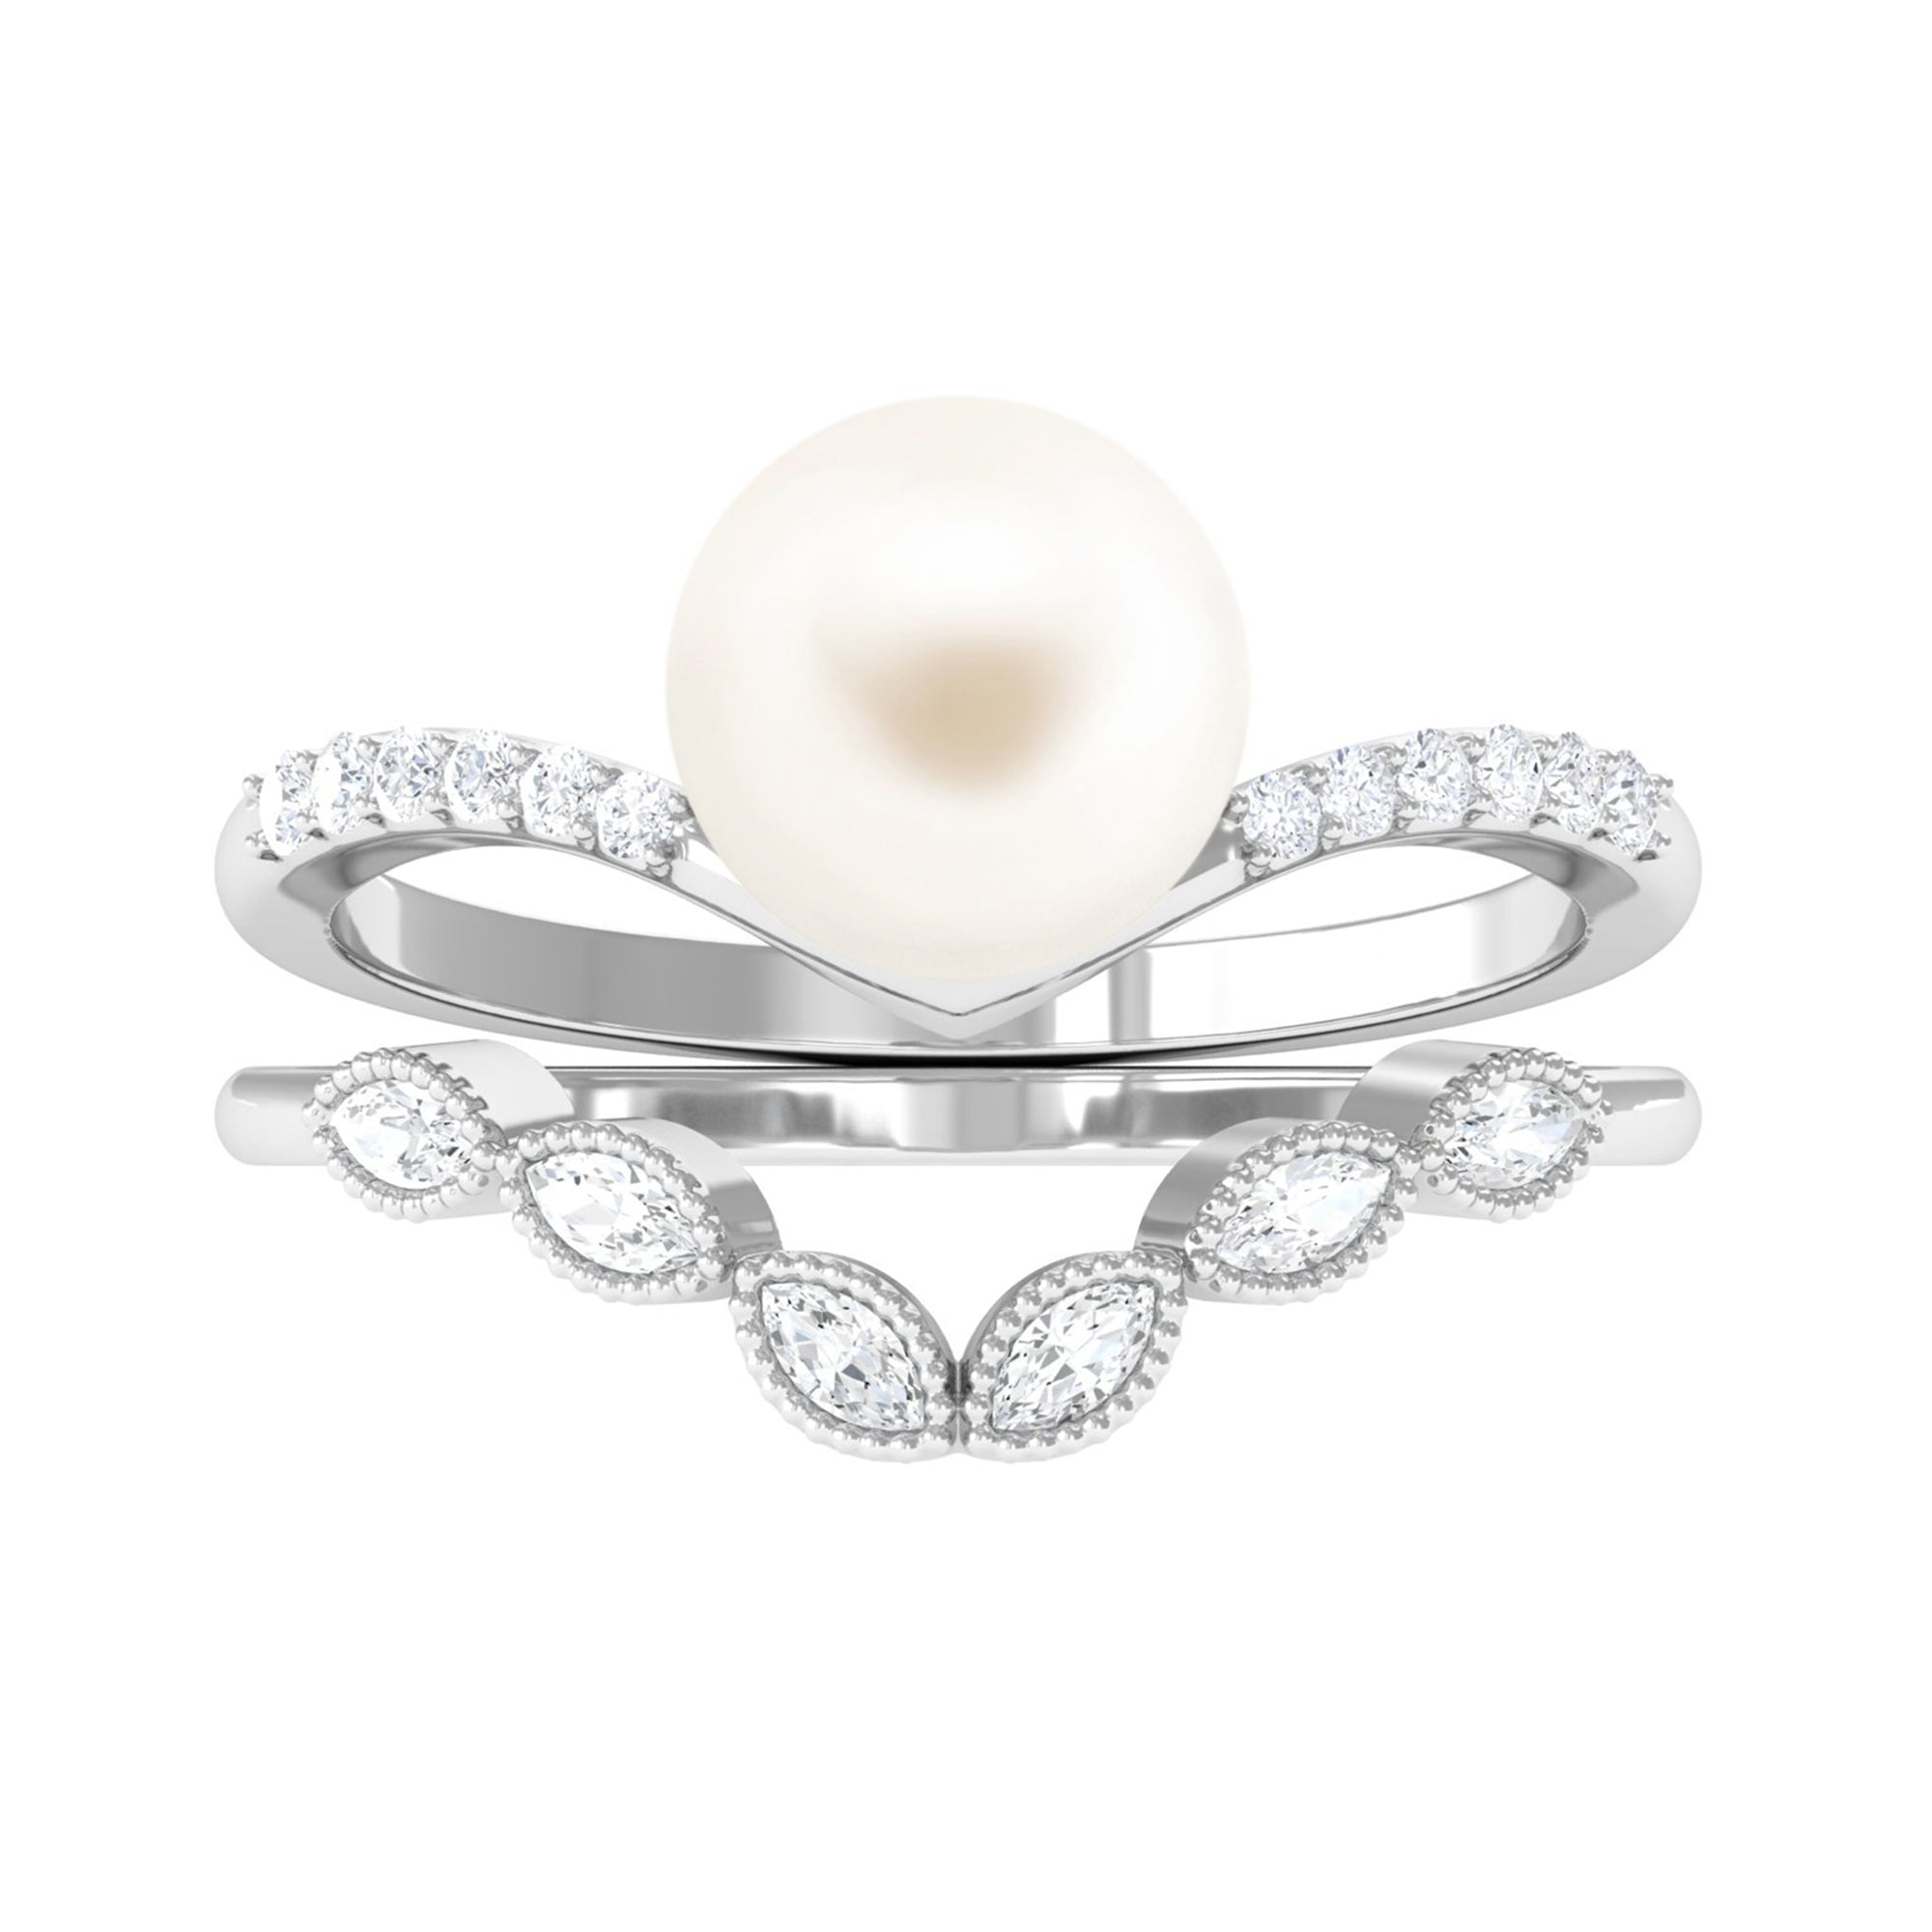 Vintage Inspired White Pearl Bridal Ring Set with Diamond Freshwater Pearl-AAA Quality - Arisha Jewels